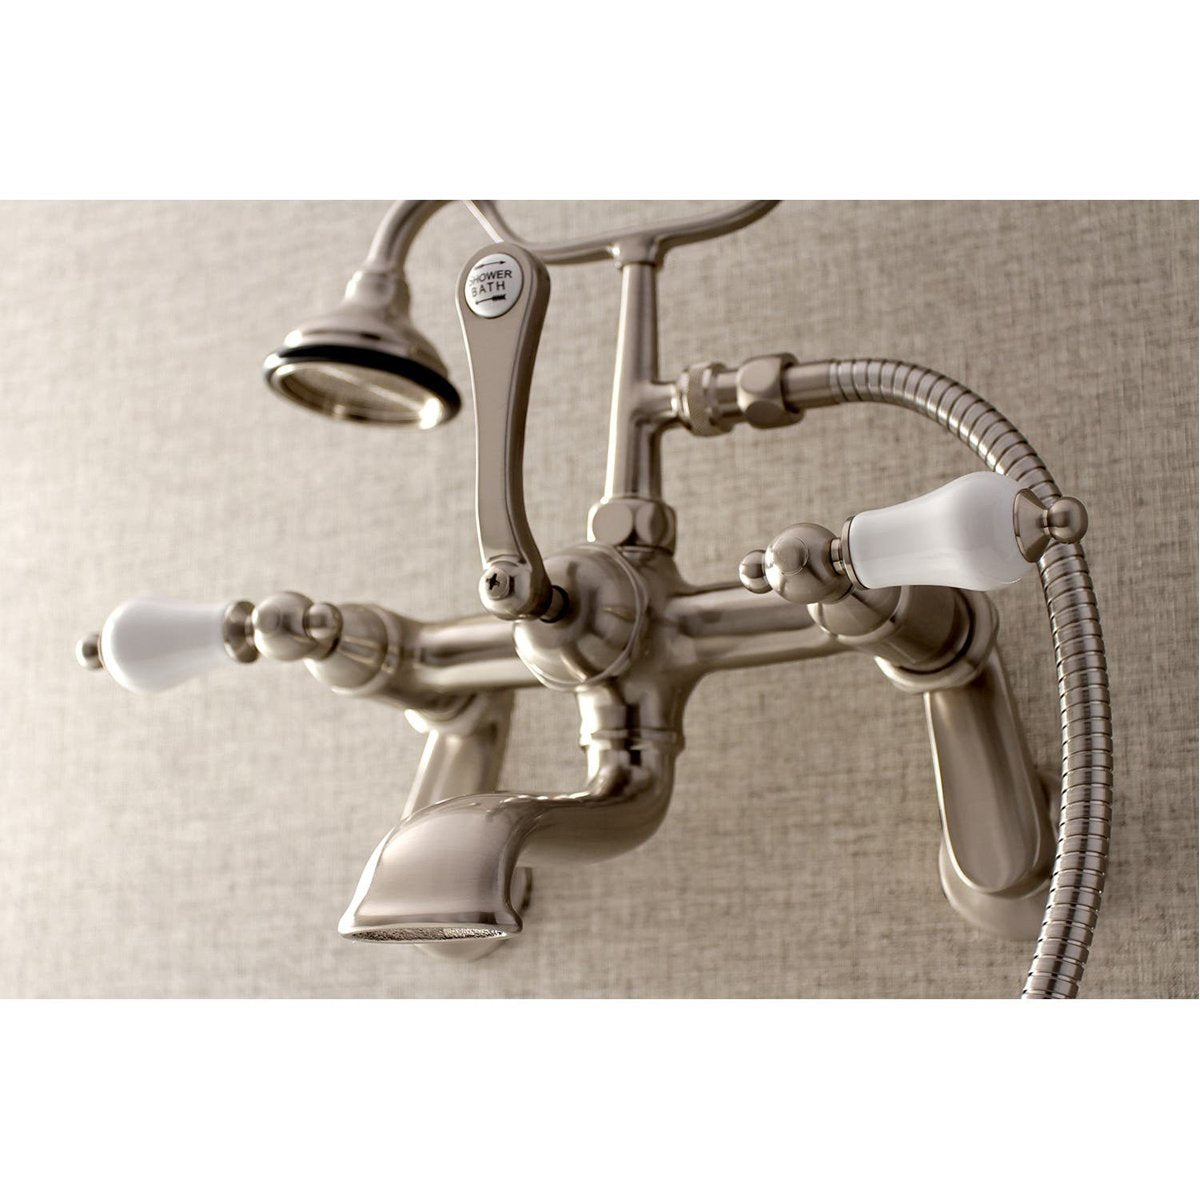 Kingston Brass Aqua Vintage Wall Mount Clawfoot Tub Faucet with Hand Shower